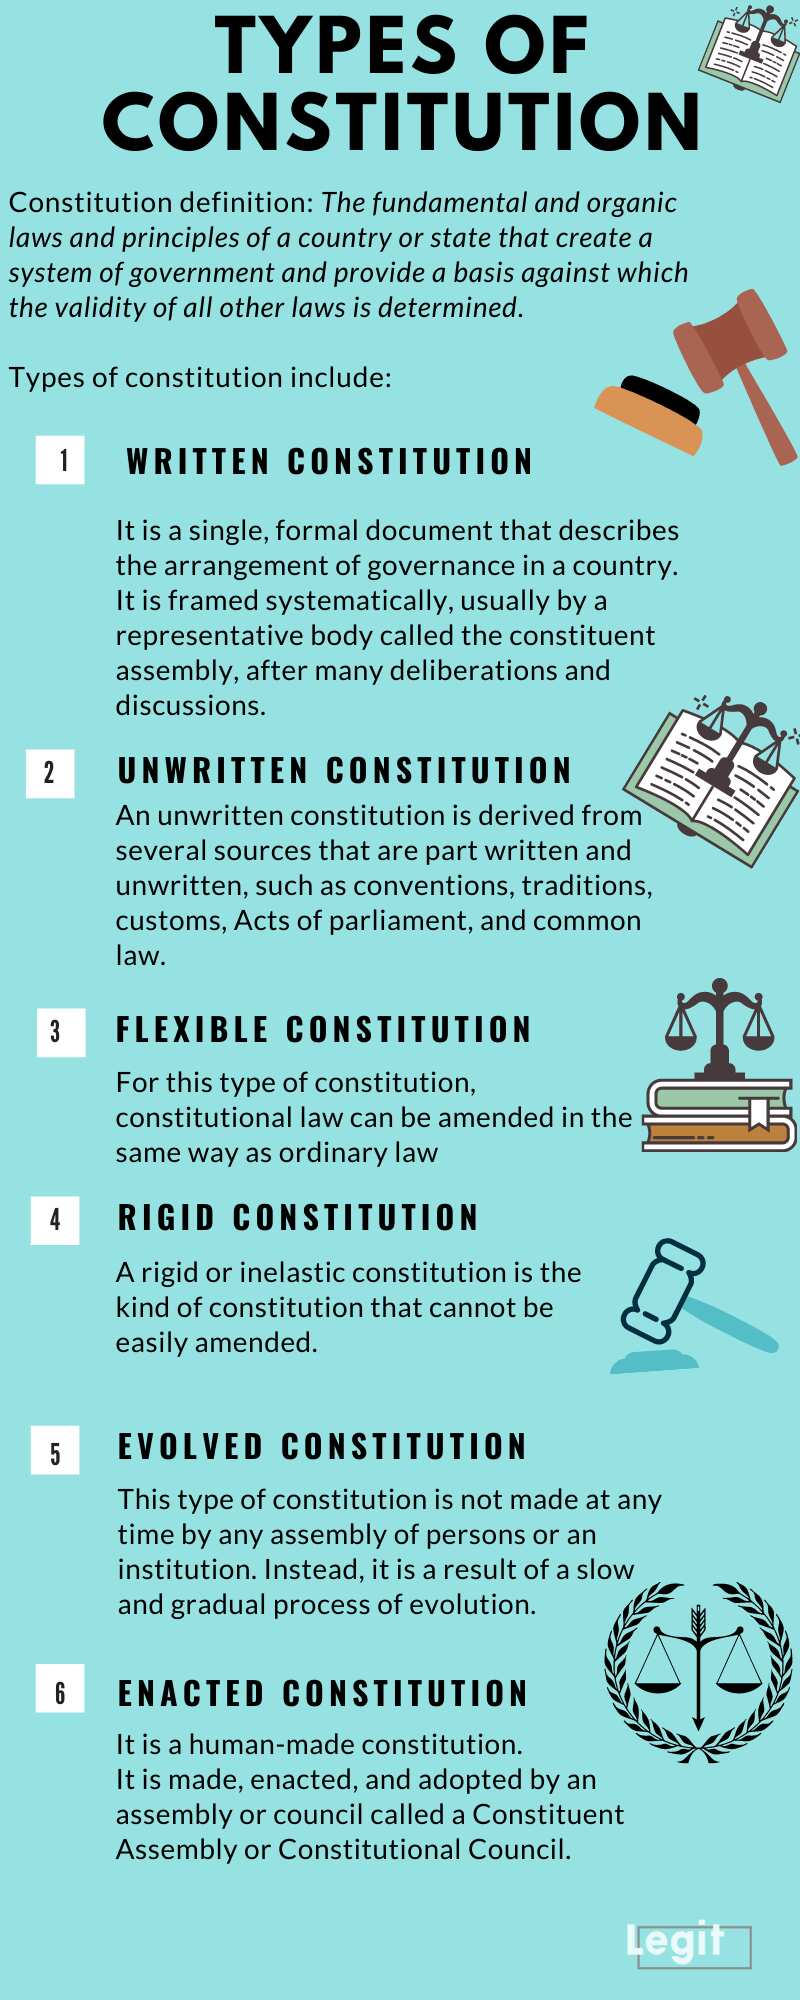 Types of constitution